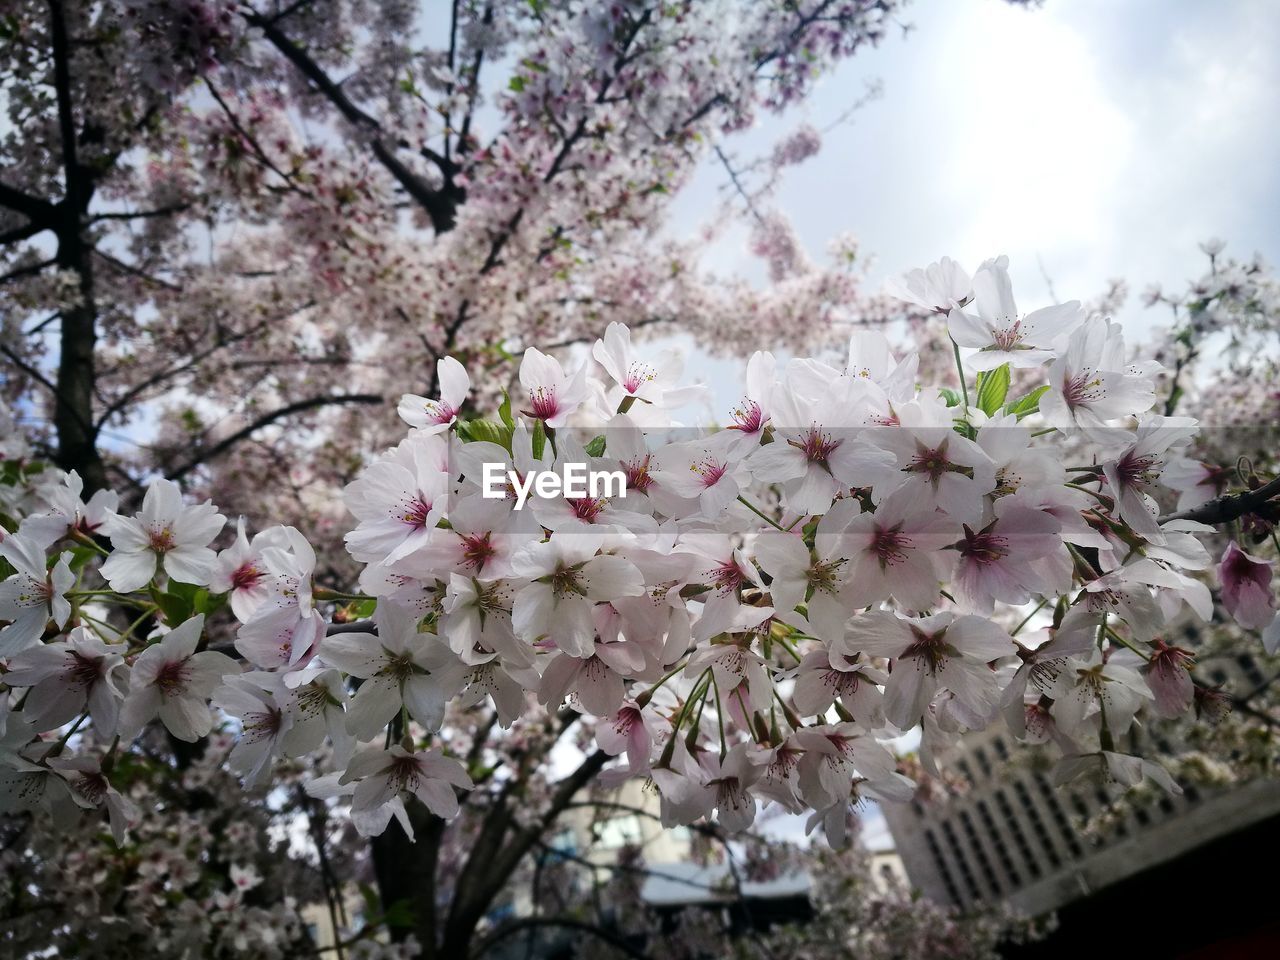 CLOSE-UP OF CHERRY BLOSSOM TREE IN SPRING